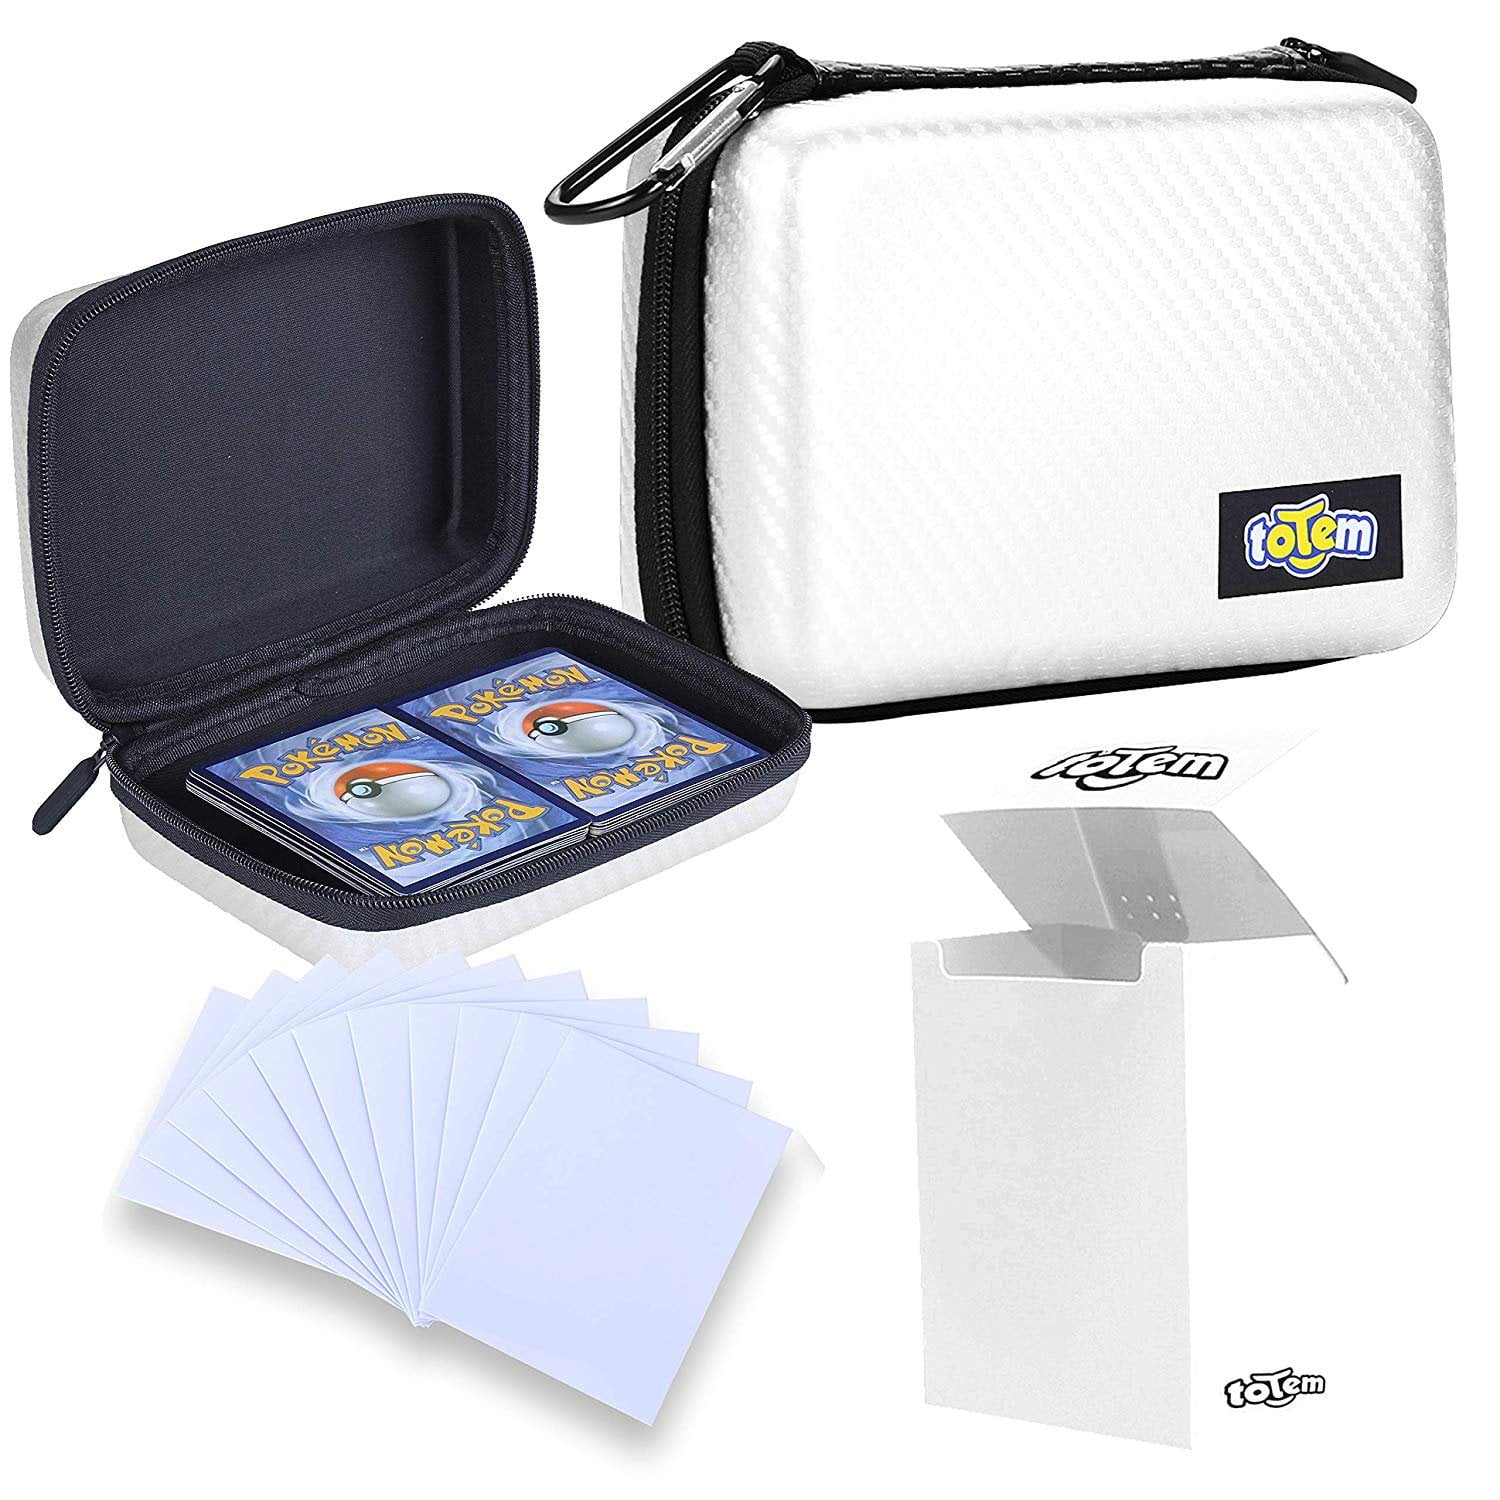 Totem World Card Case with Deck Box Protector and 100 Card Sleeves - Compatible with Pokemon, Yu-Gi-Oh, and Magic The Gathering Cards - Kid Safe Zipper Carrying Organizer - 500 Card Holder (White)